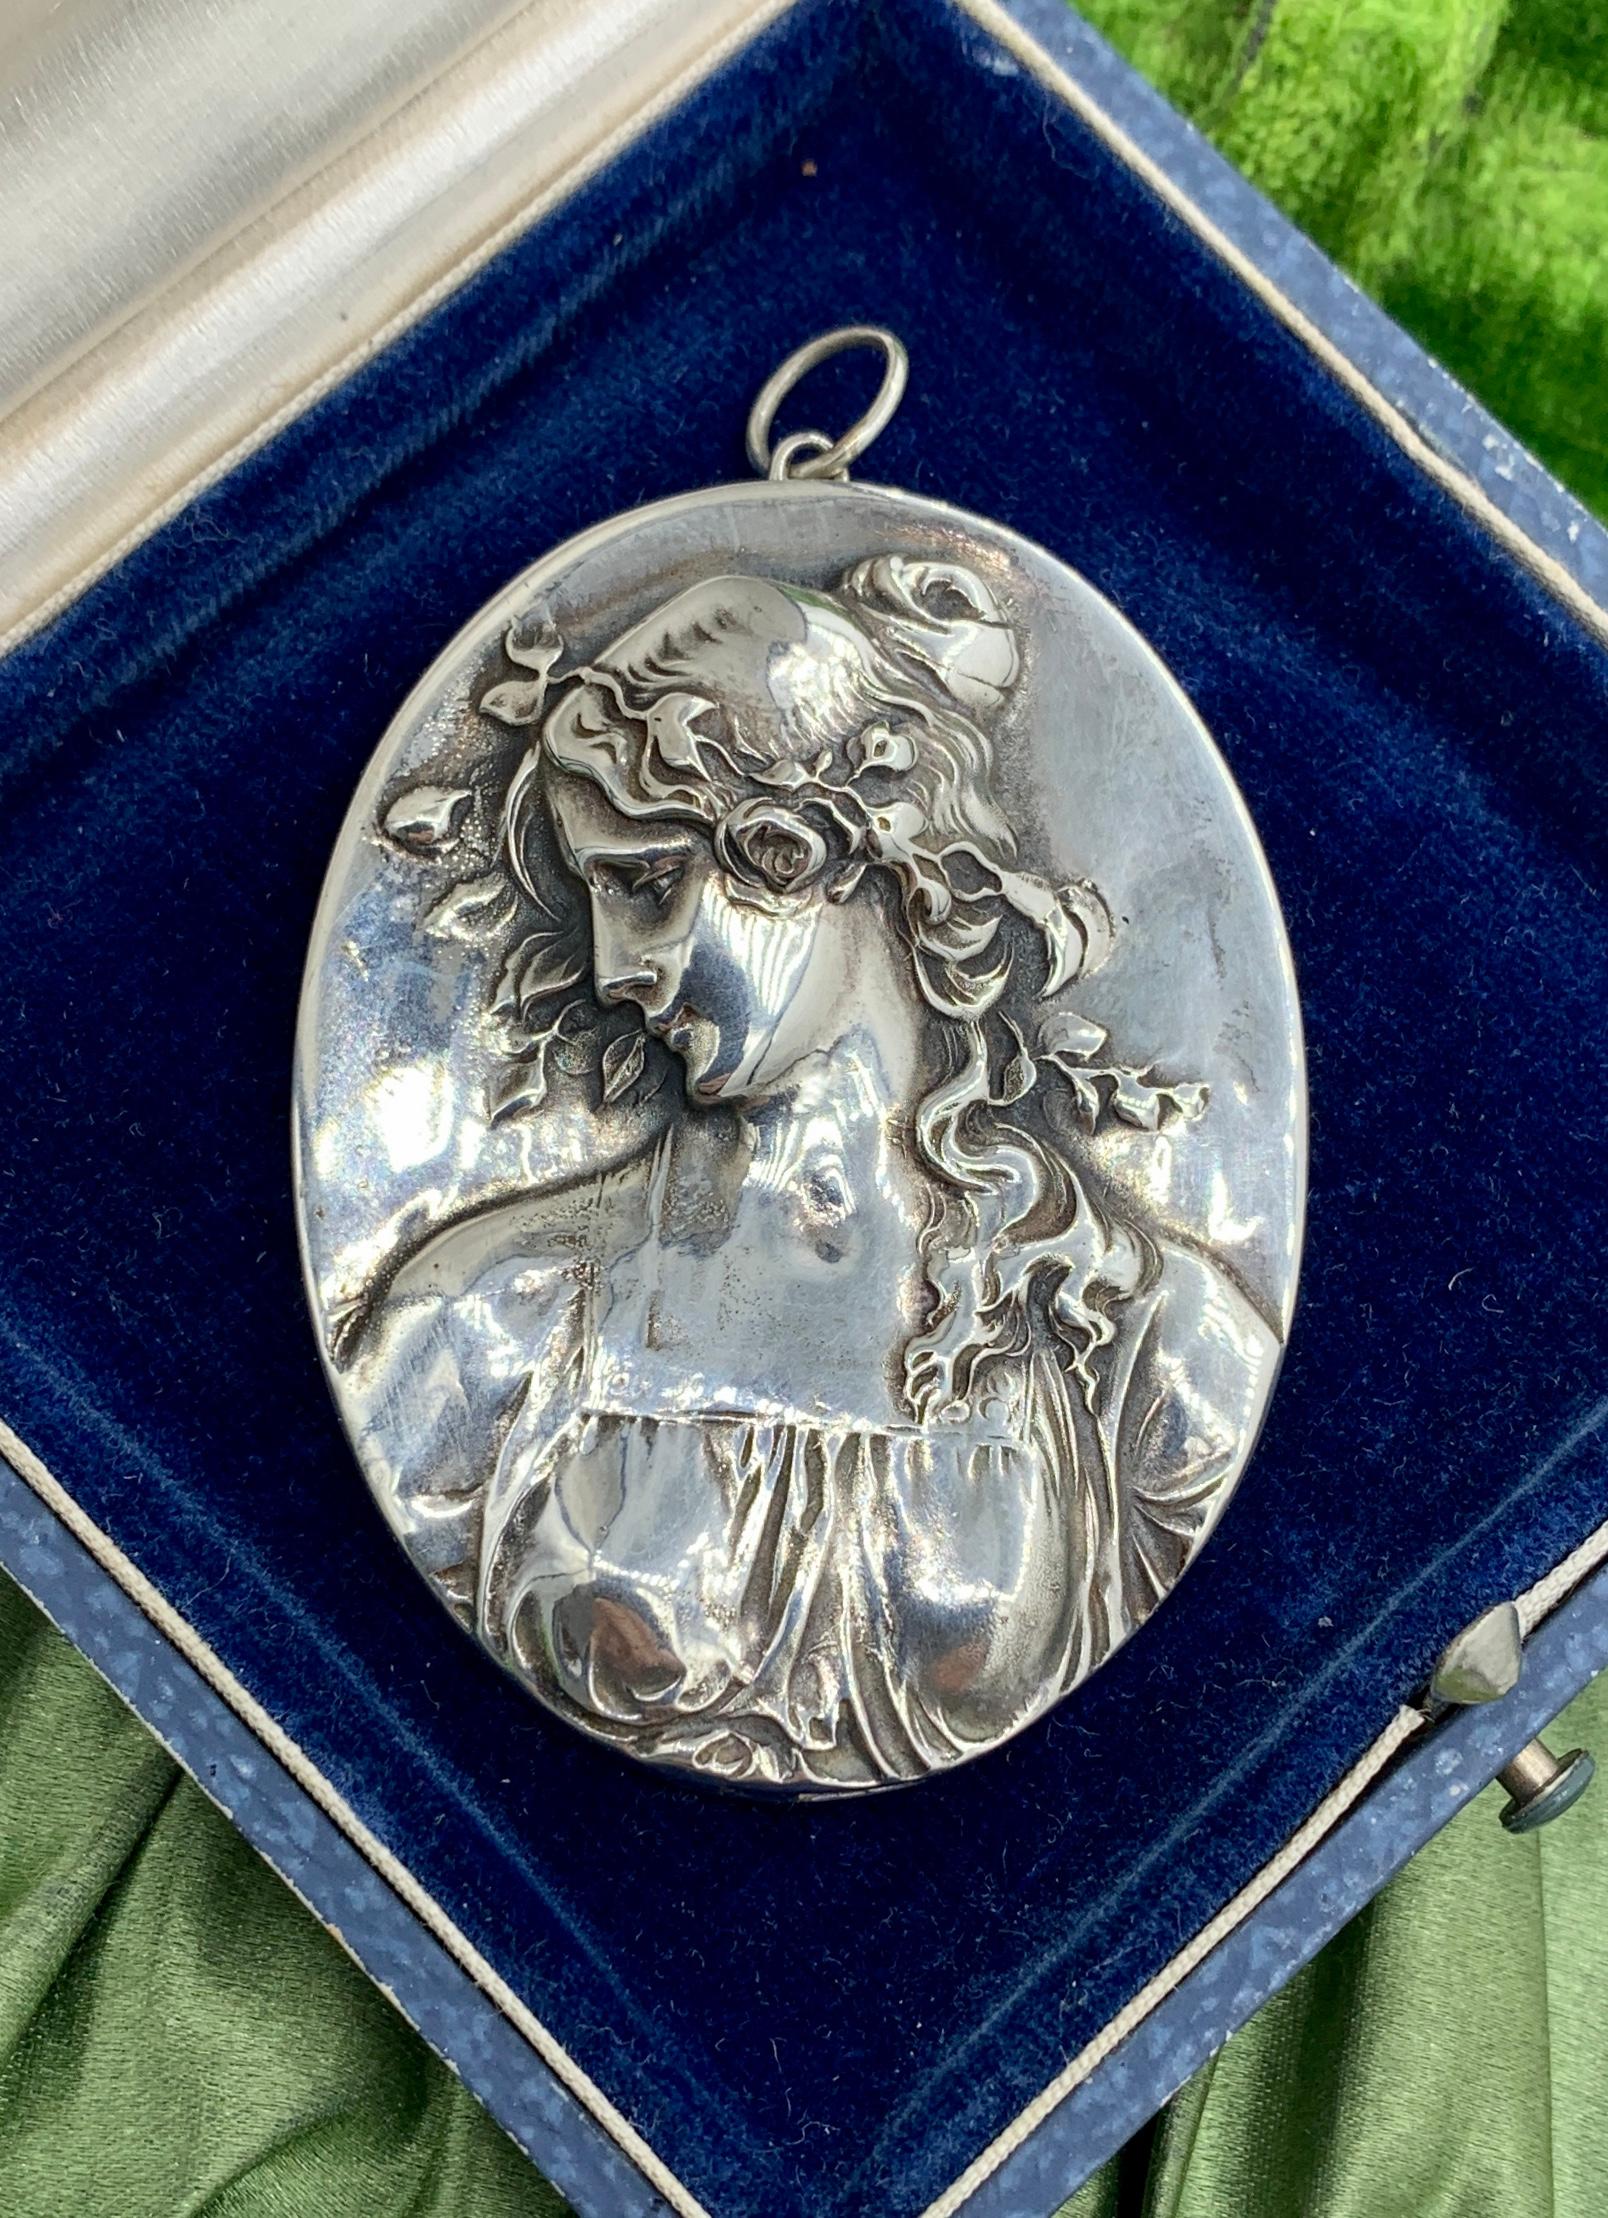 Indulge in a Primavera Henryk Winograd Sterling Silver Pendant Necklace.  This is a stunning Sterling Silver Pendant by Henryk Winograd featuring a gorgeous deep repousse image of a woman with flower garlands in her hair depicting the Primavera or